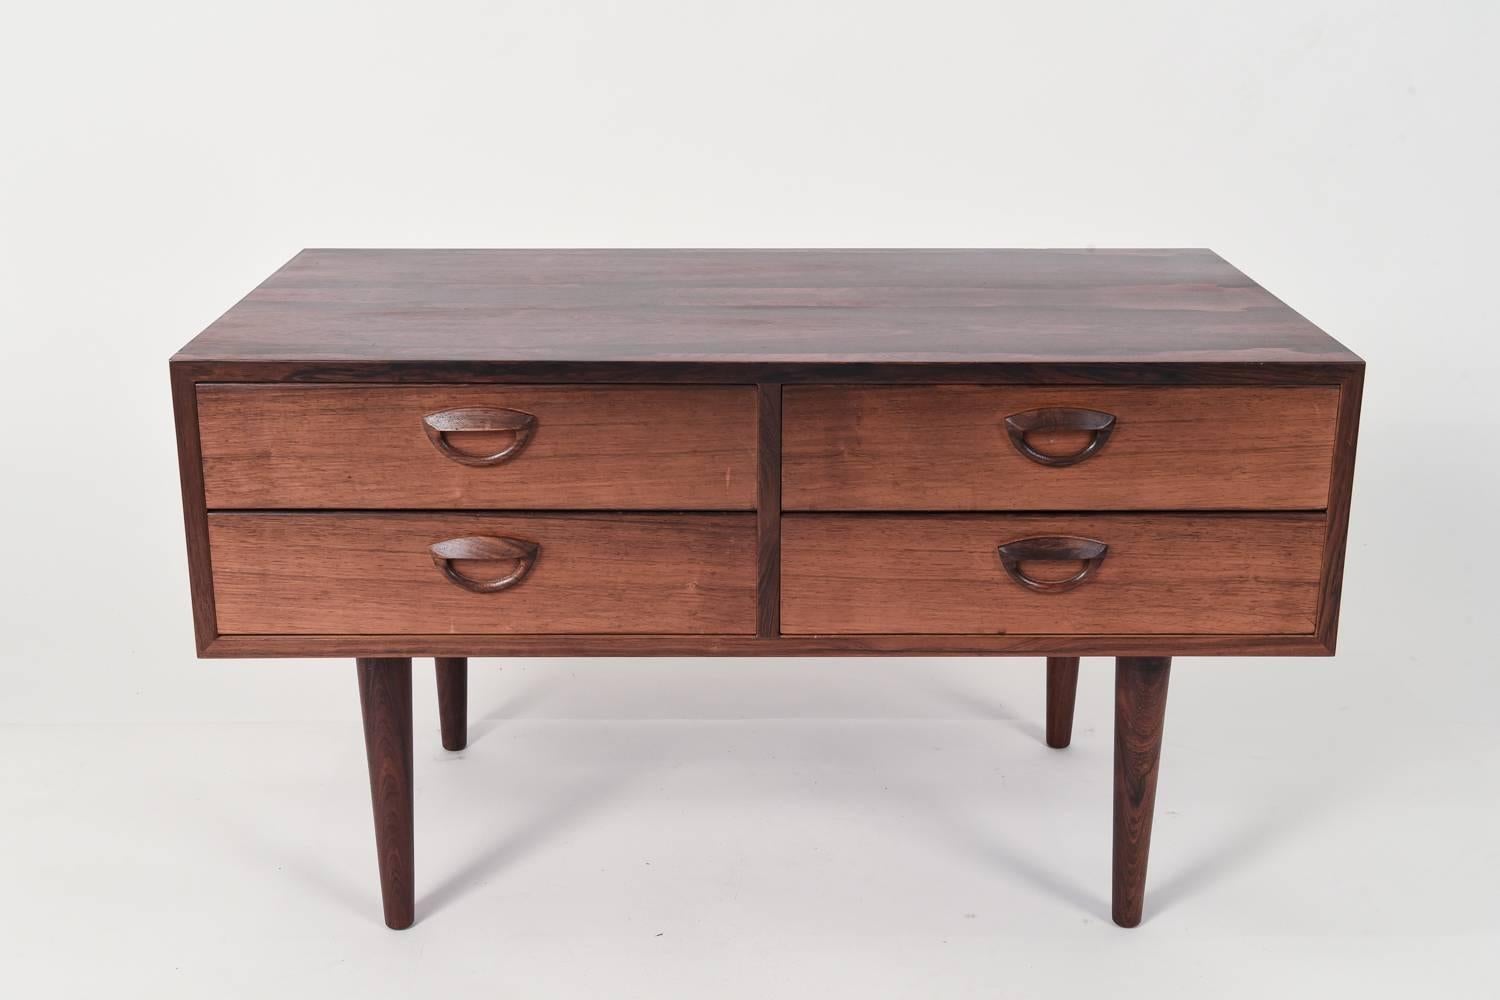 A beautiful small four-drawer chest in rosewood.